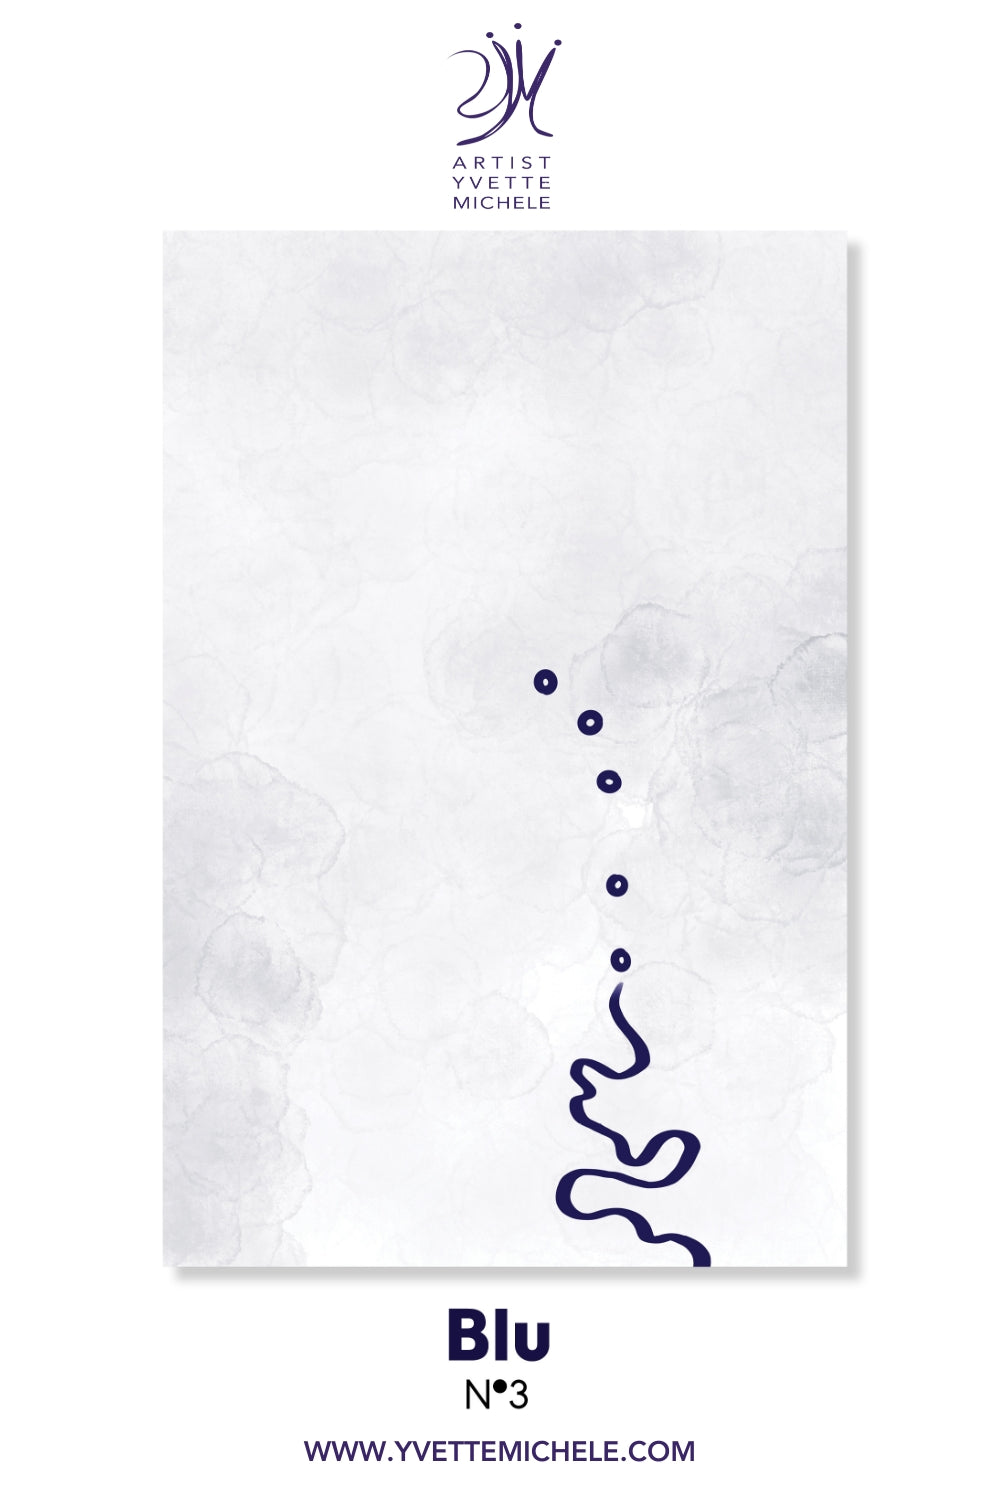 Blu No.3 - Large Modern Blue Abstract Canvas Art - House of Yvette Michele 